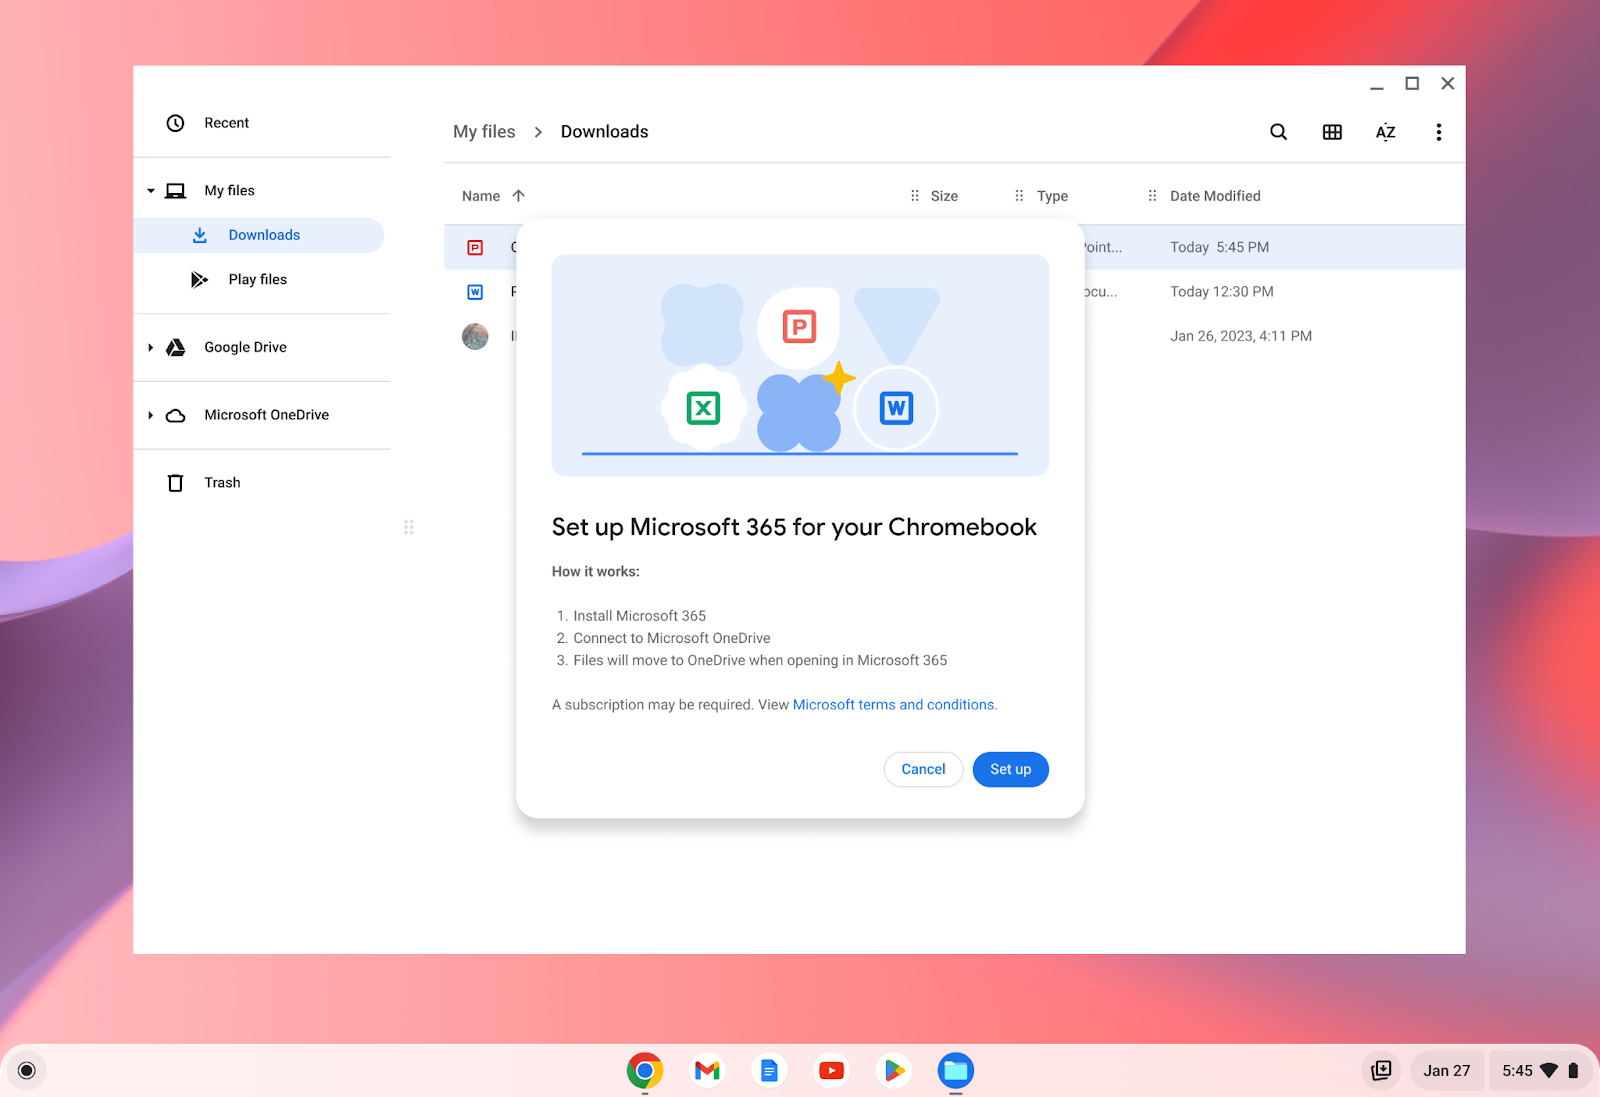 Microsoft 365 is coming to Chrome OS in 2023!